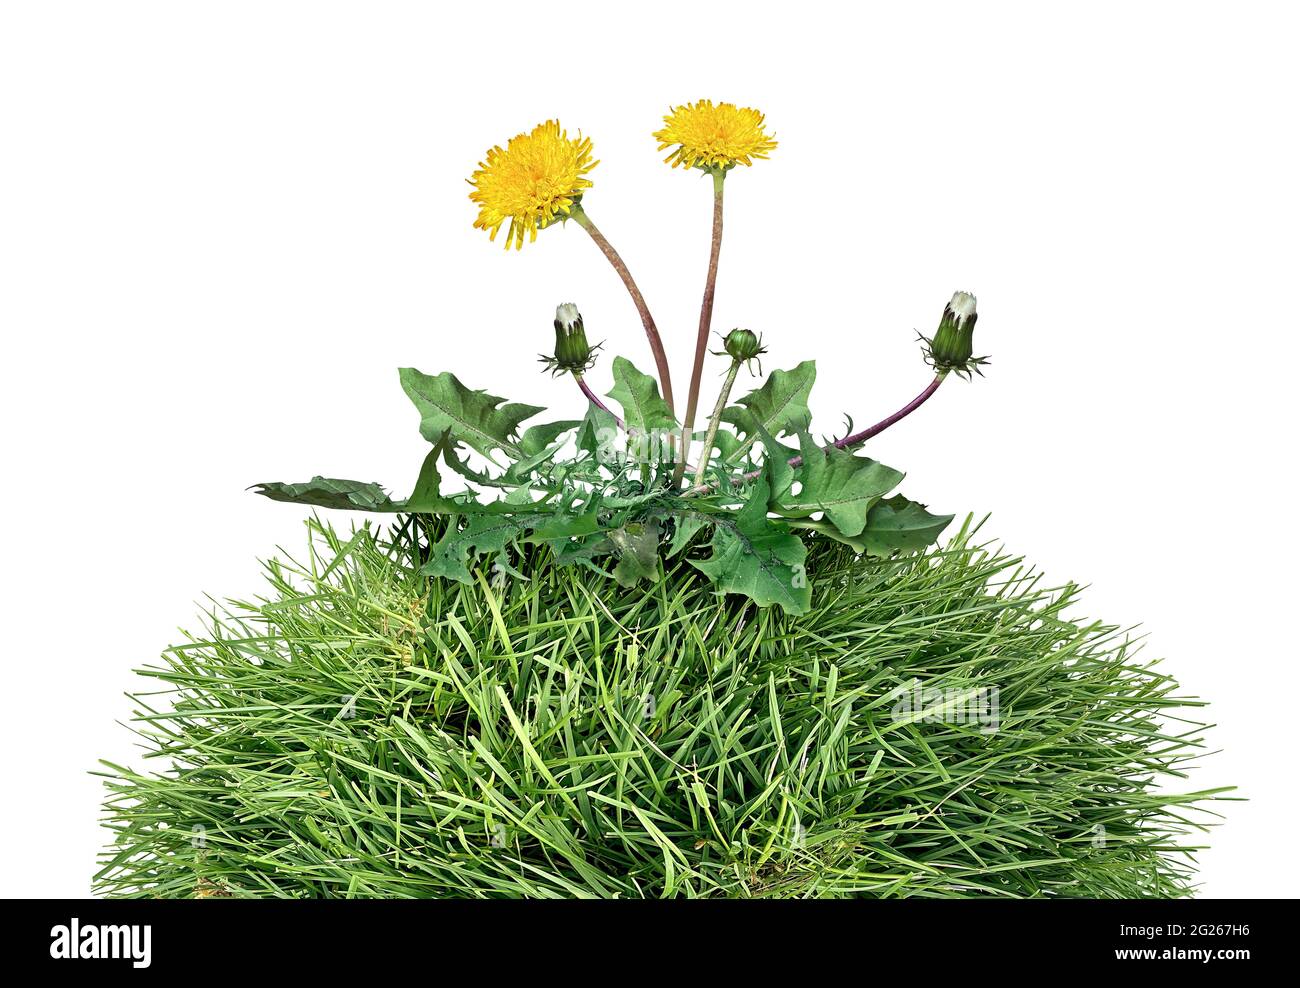 Yard weed as a dandelion flower pant as a symbol of grass weeds and herbicide as a garden or gardening and landscaping concept and backyard chores. Stock Photo